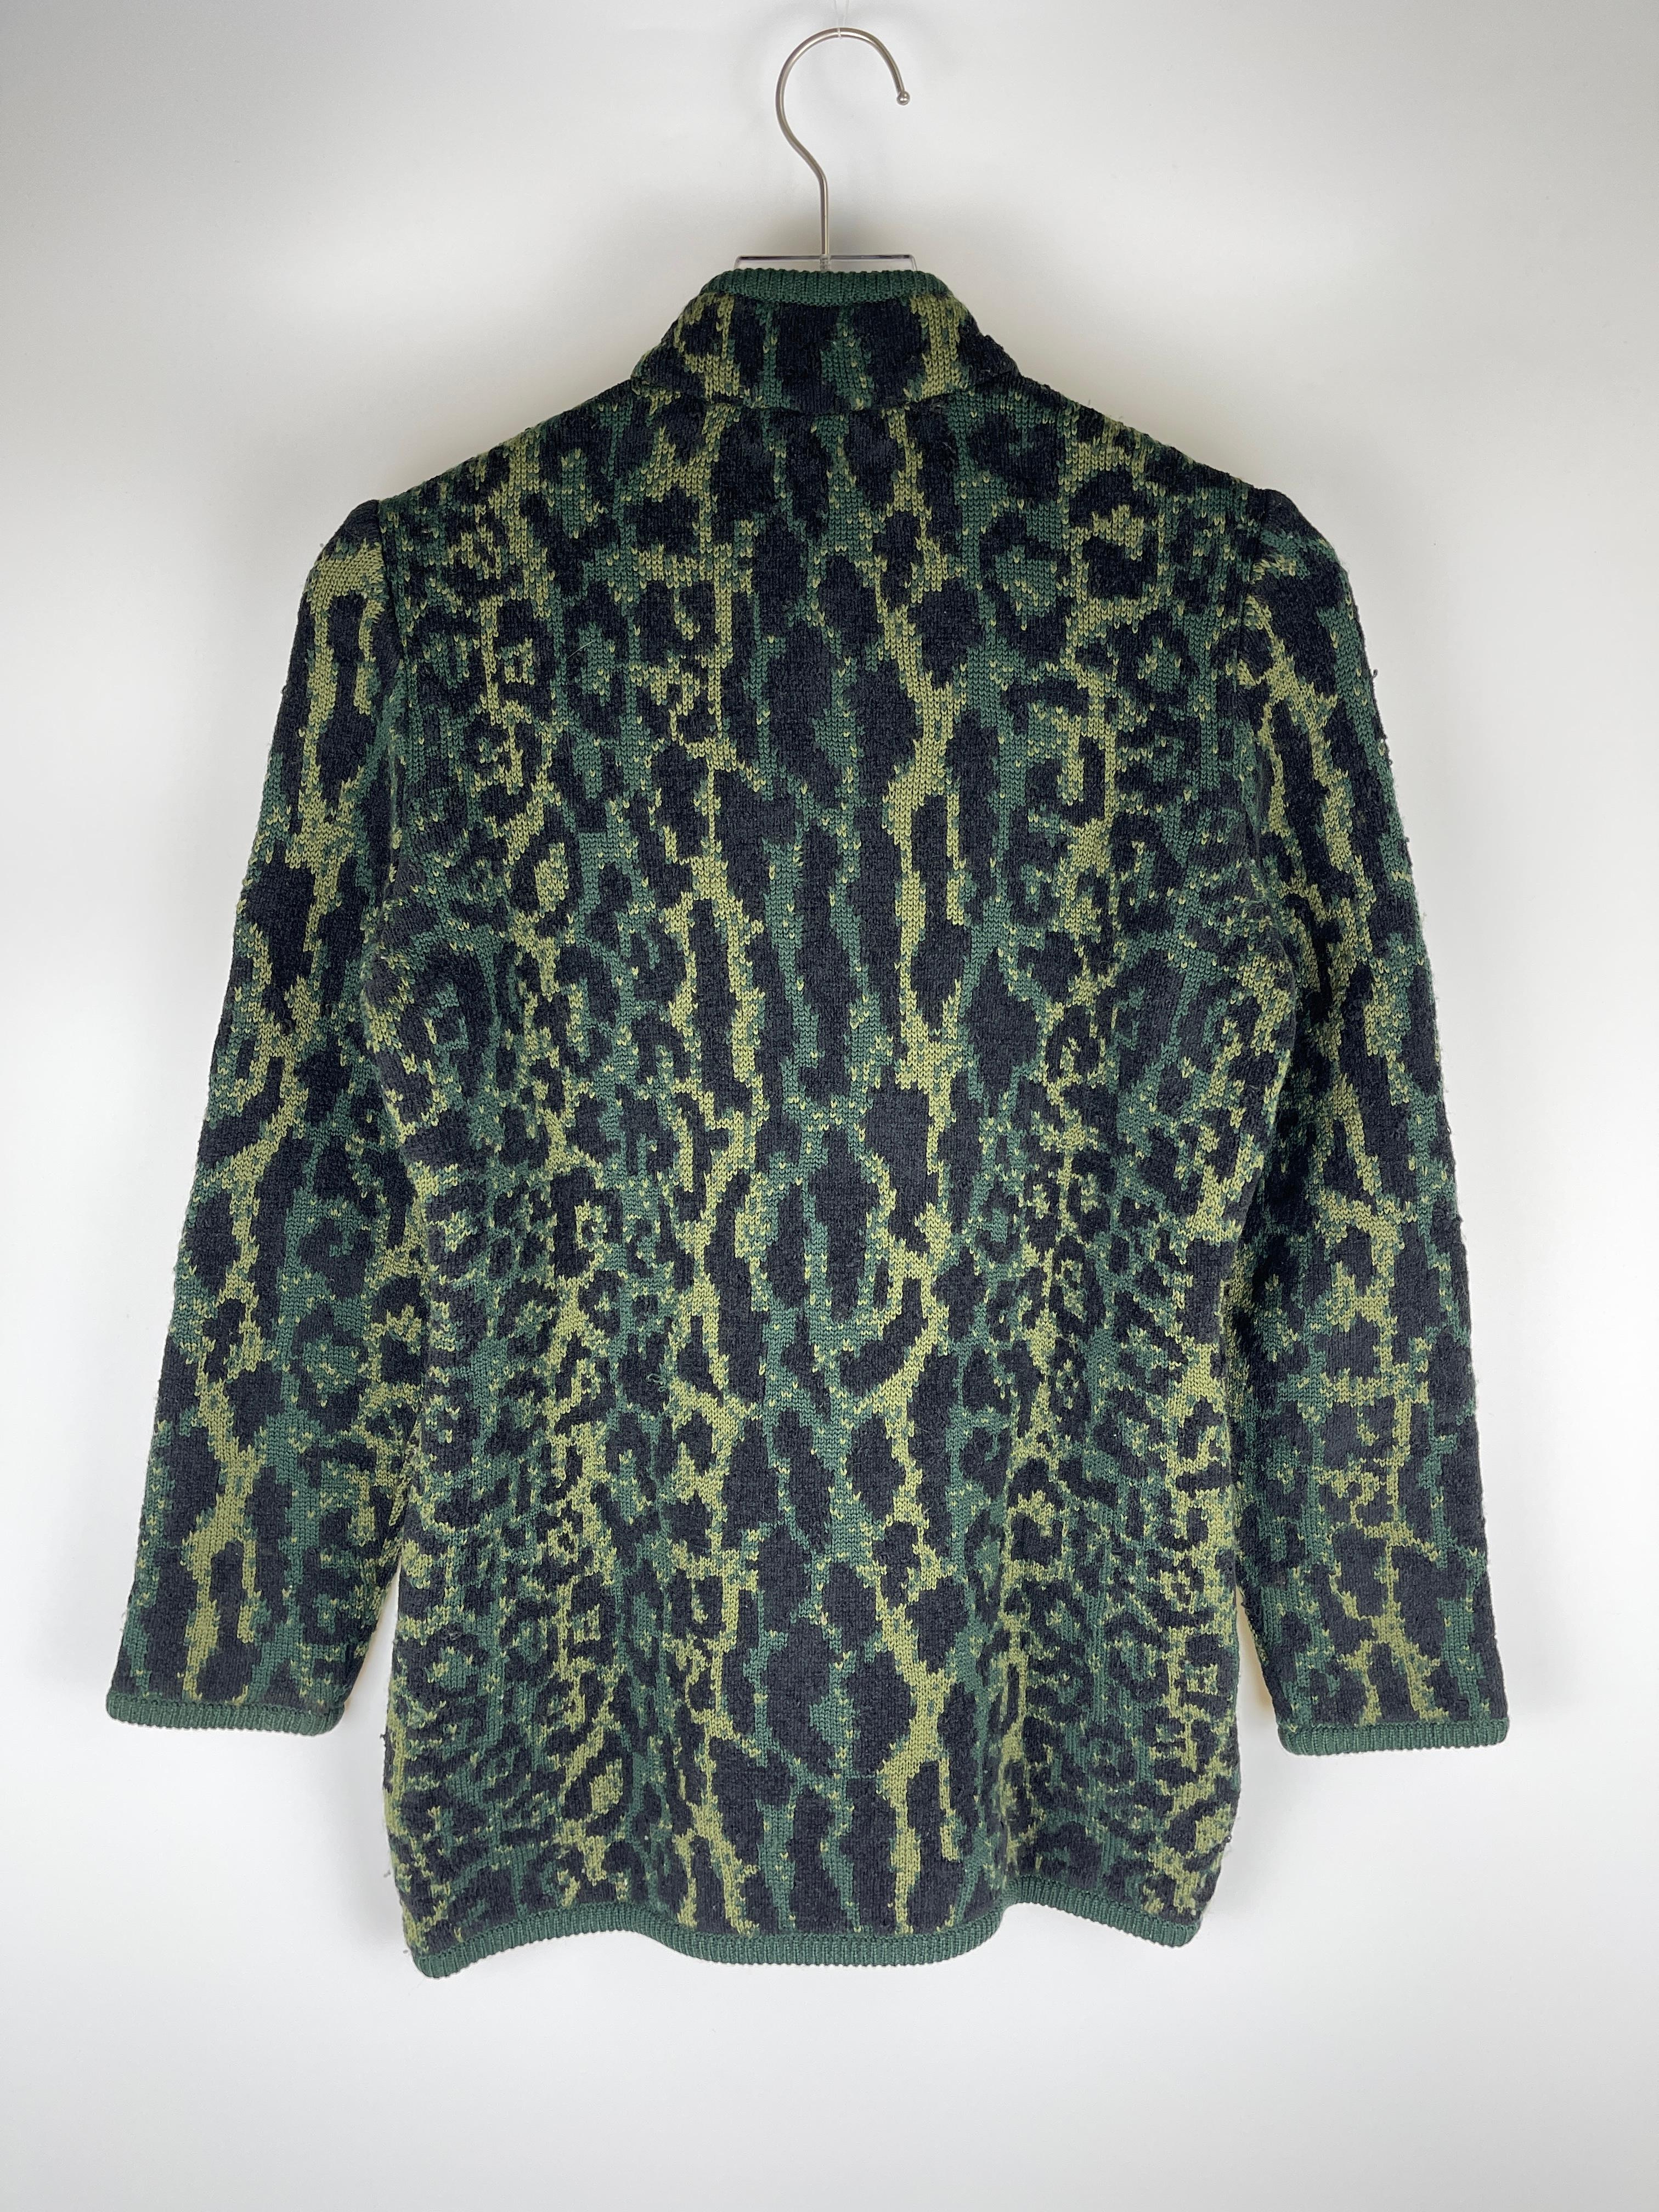 Yves Saint Laurent 1980's Snow Leopard Sweater  In Good Condition For Sale In Tương Mai Ward, Hoang Mai District